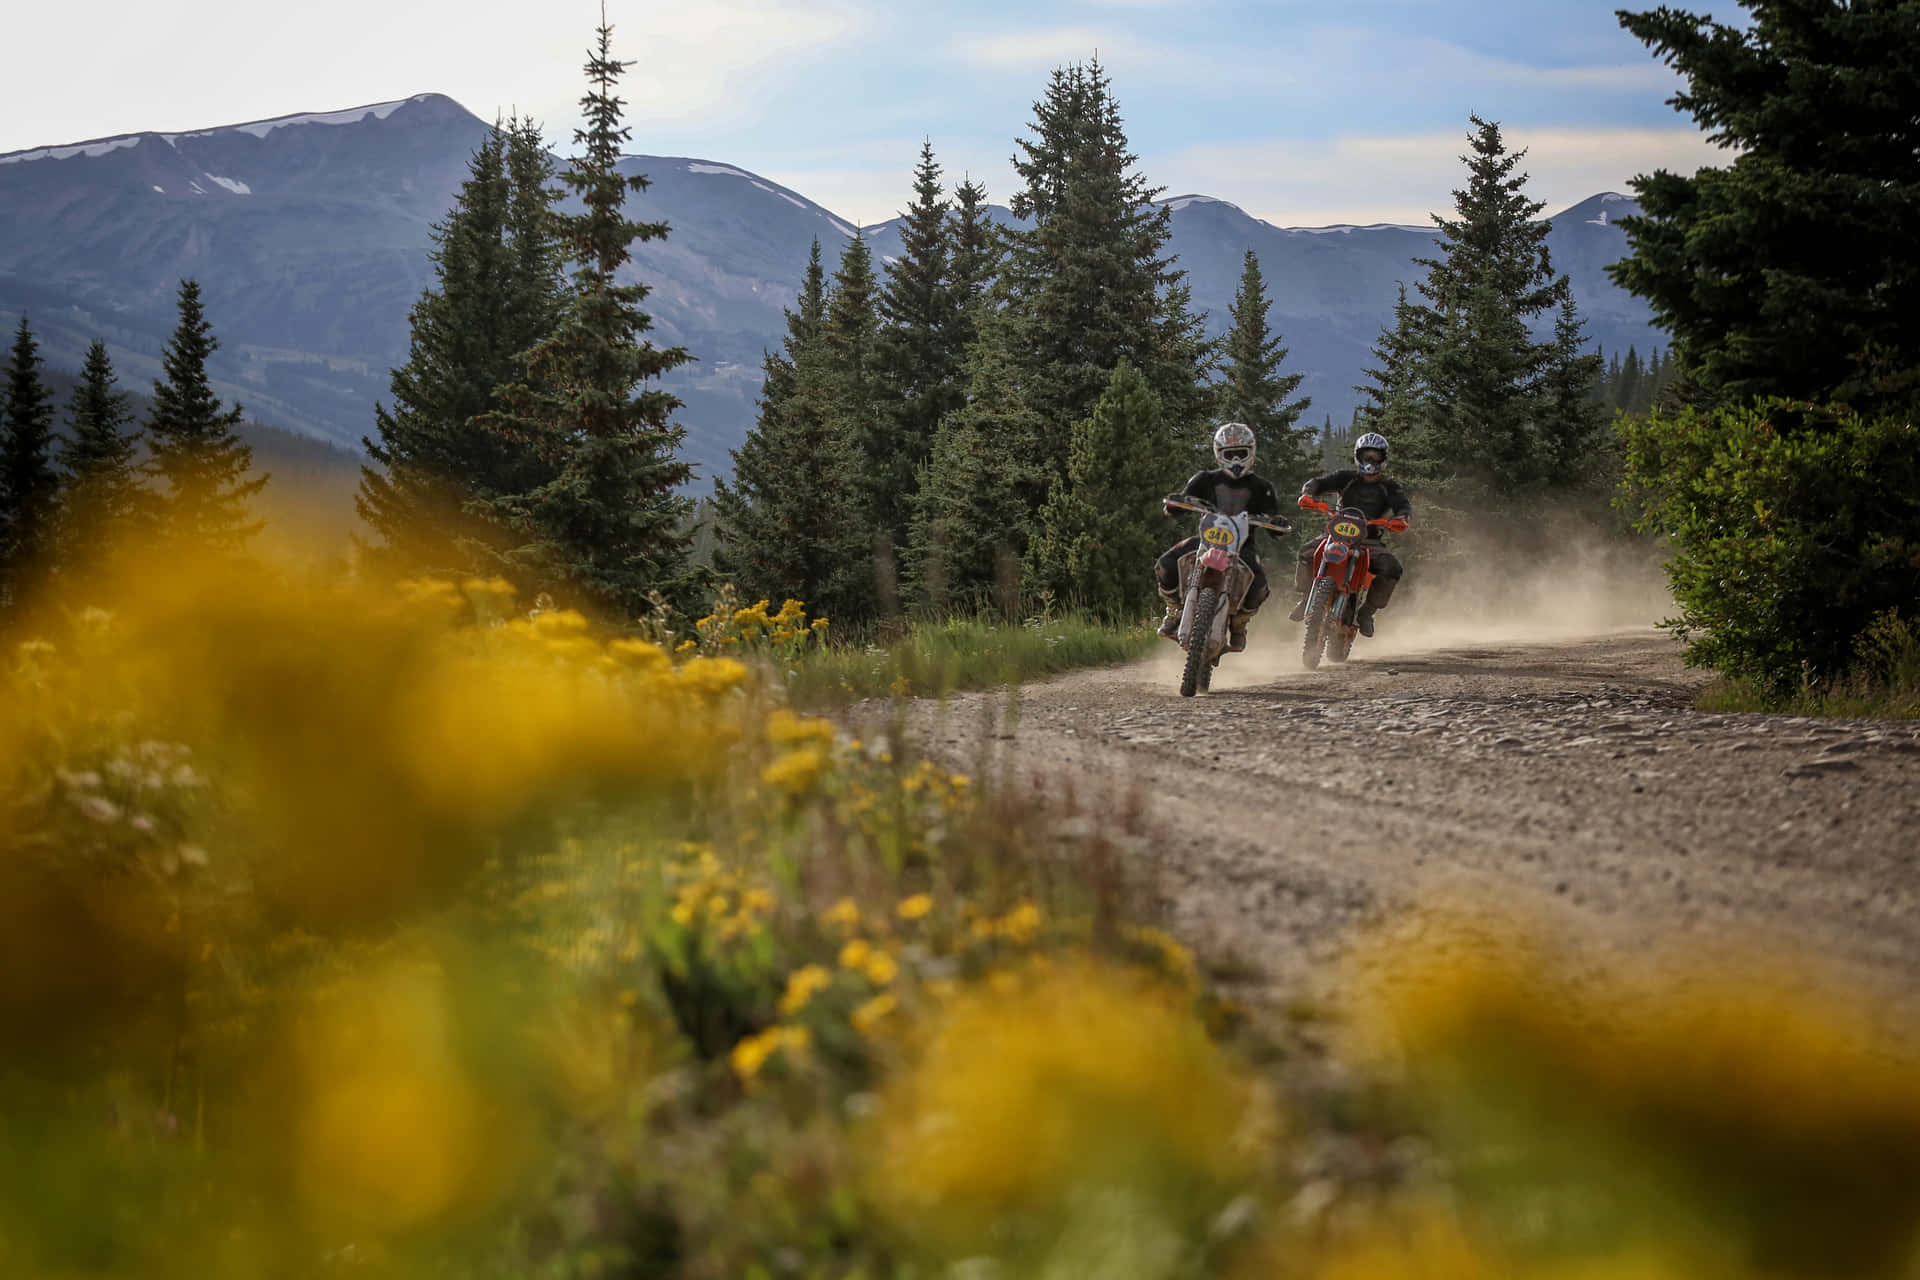 Exciting Off-Road Adventure with a Dirtbike